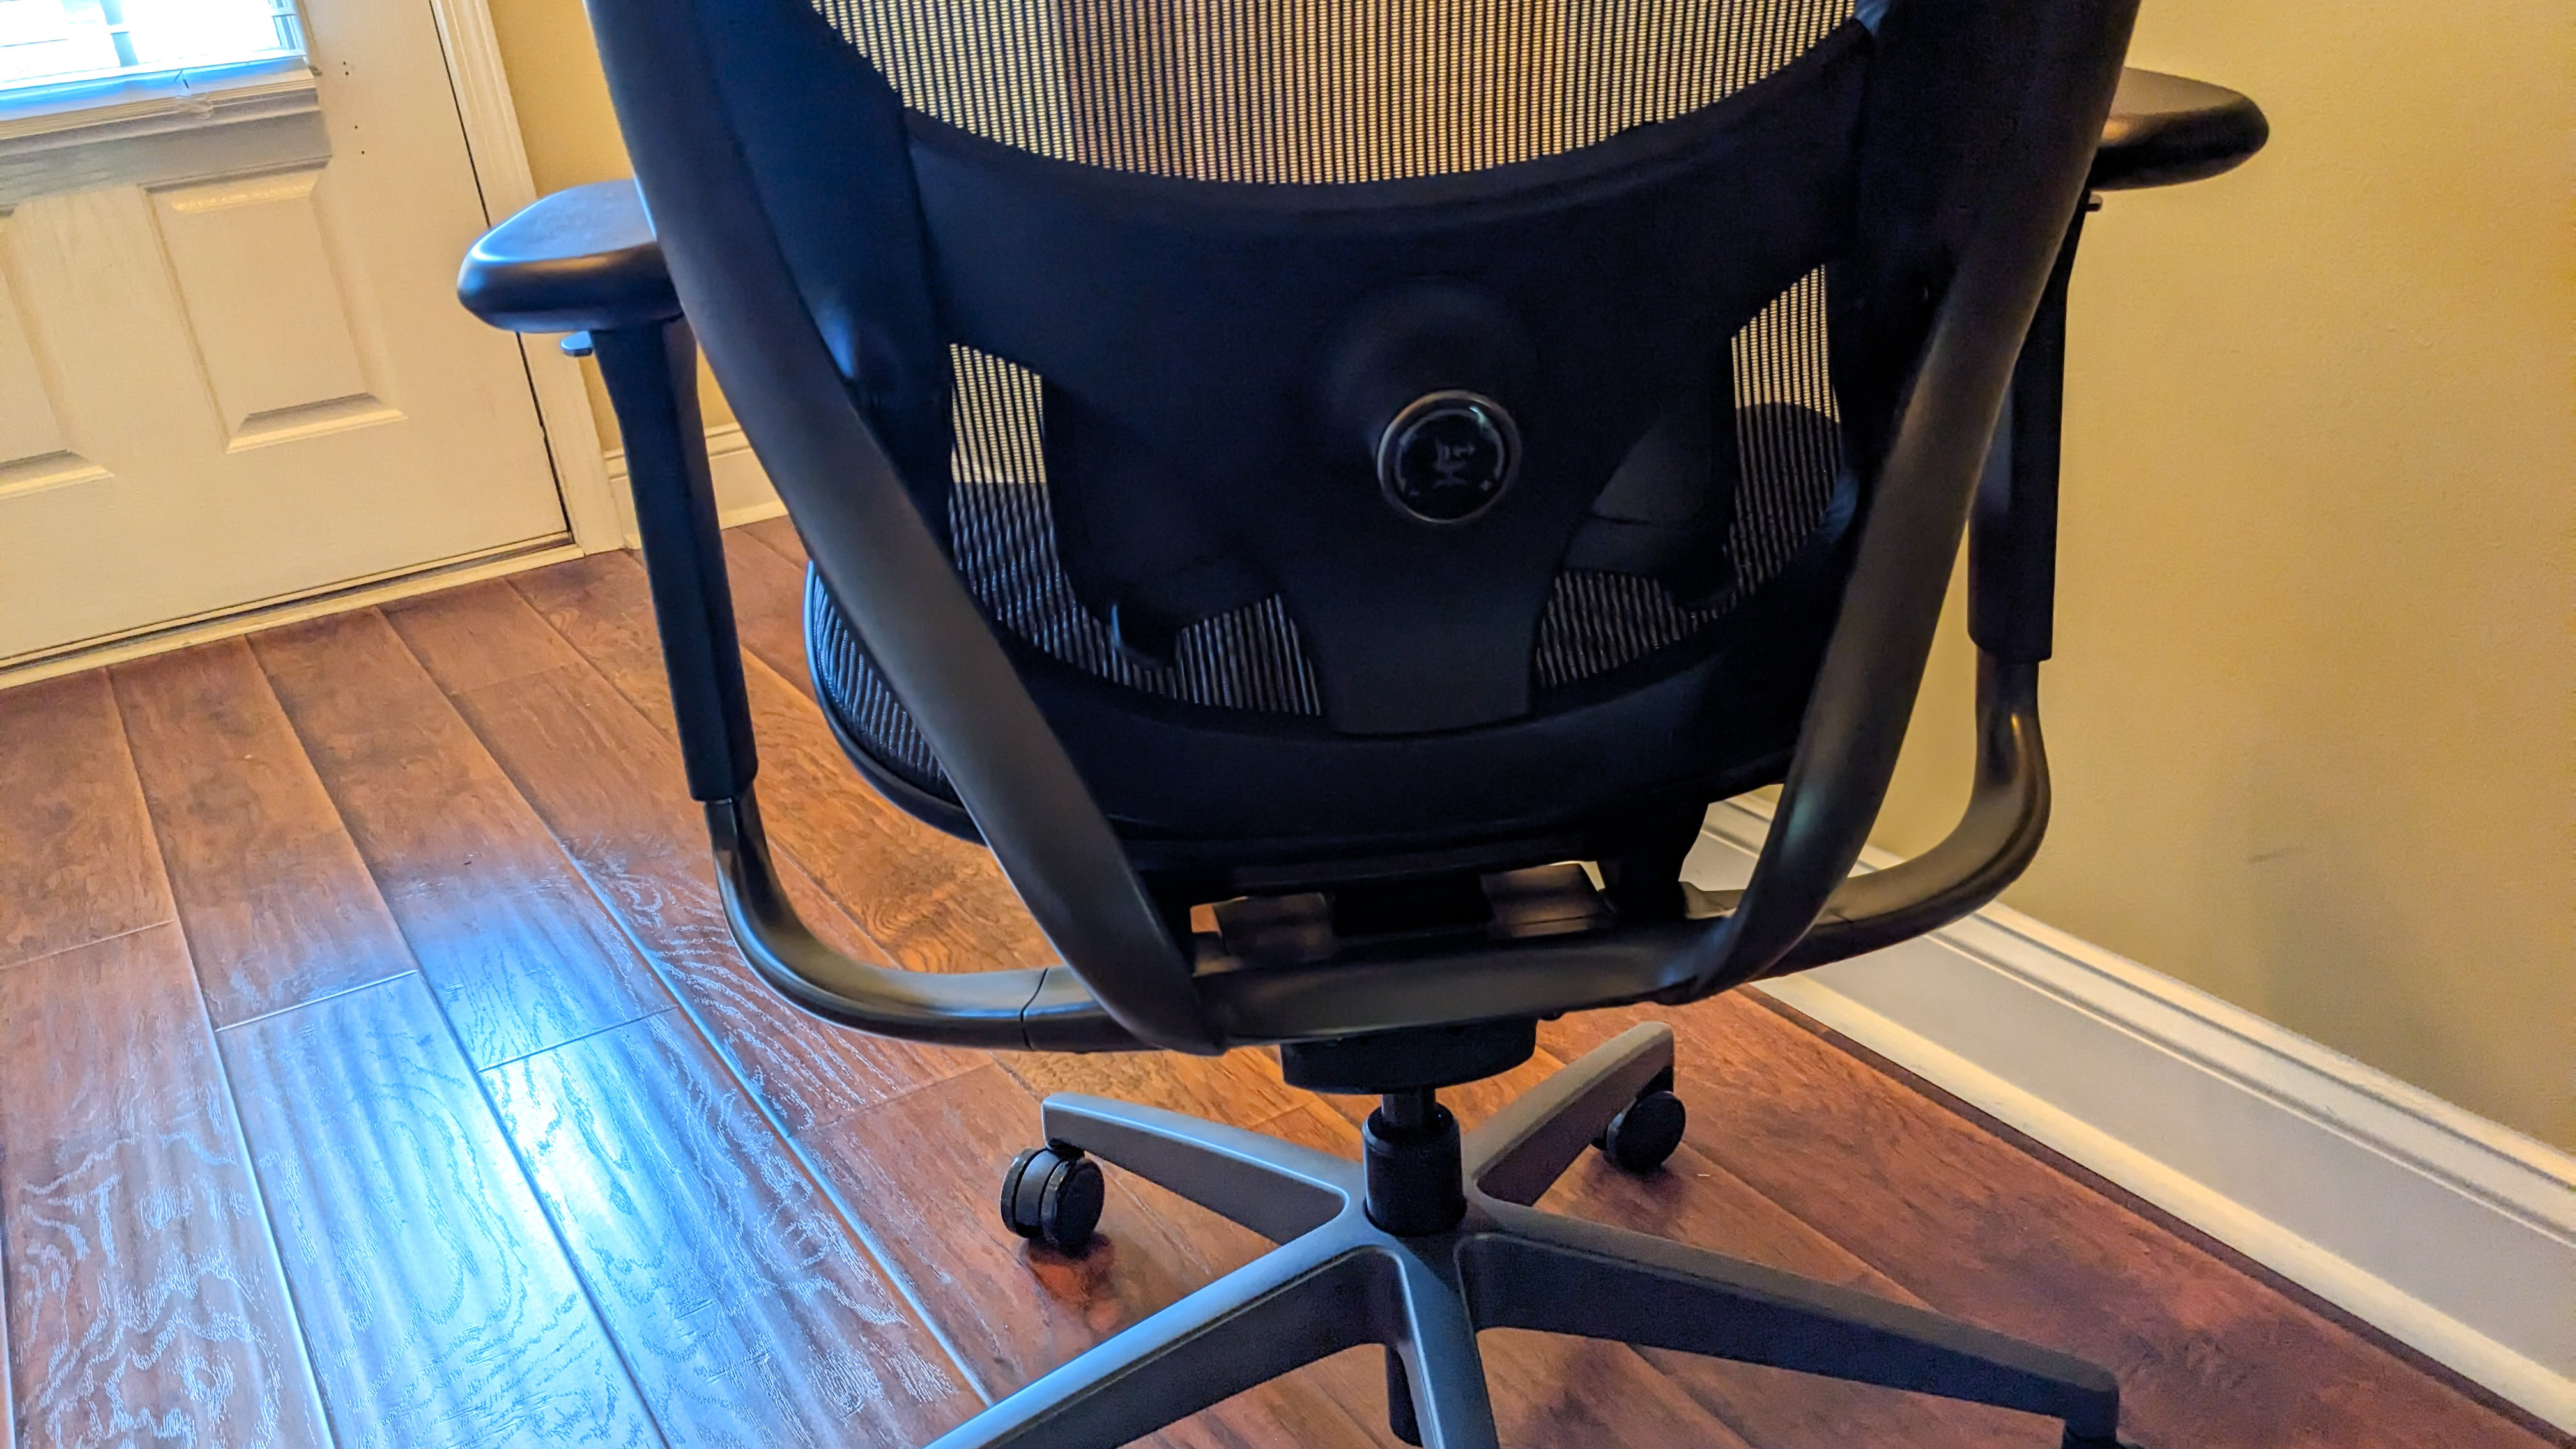 A picture showing the 2D lumbar support on the Razer Fujin Pro